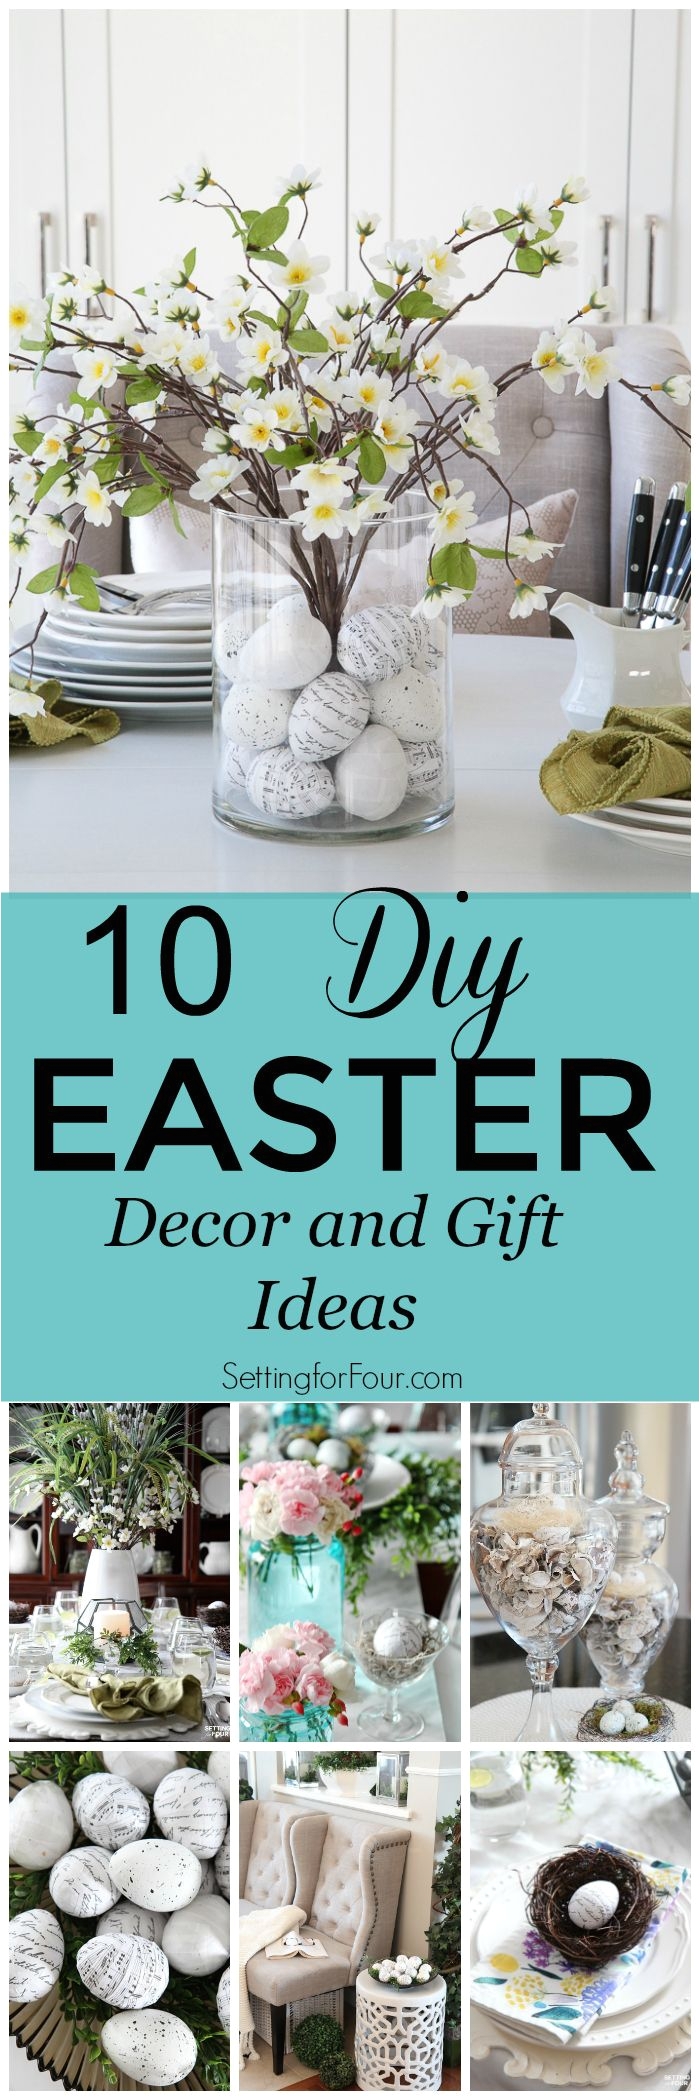 10 diy easter decor and gift ideas